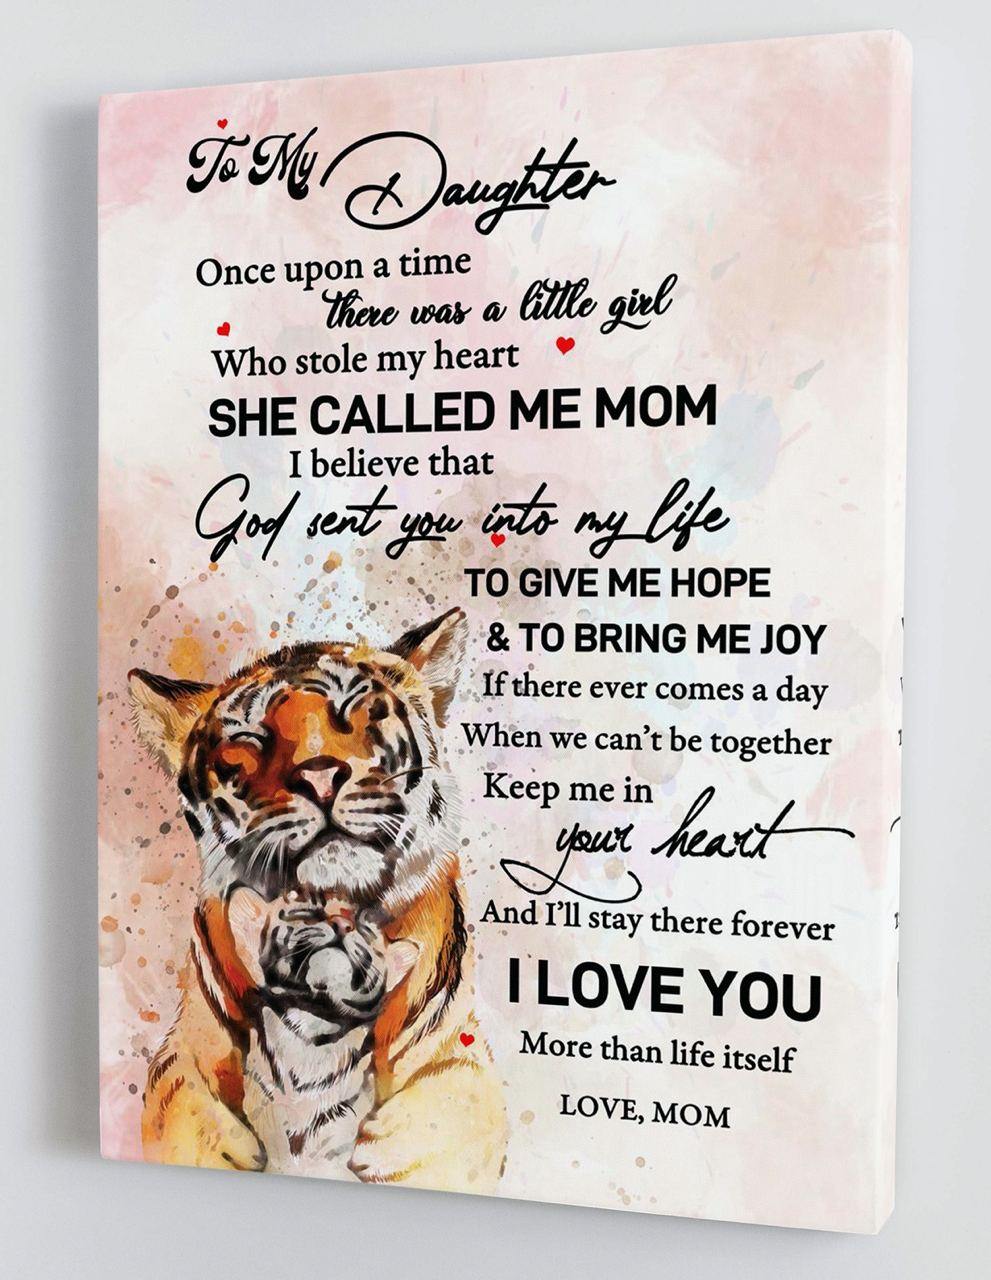 To My Daughter - From Mom - Framed Canvas Gift MD051 - DivesArt LLC